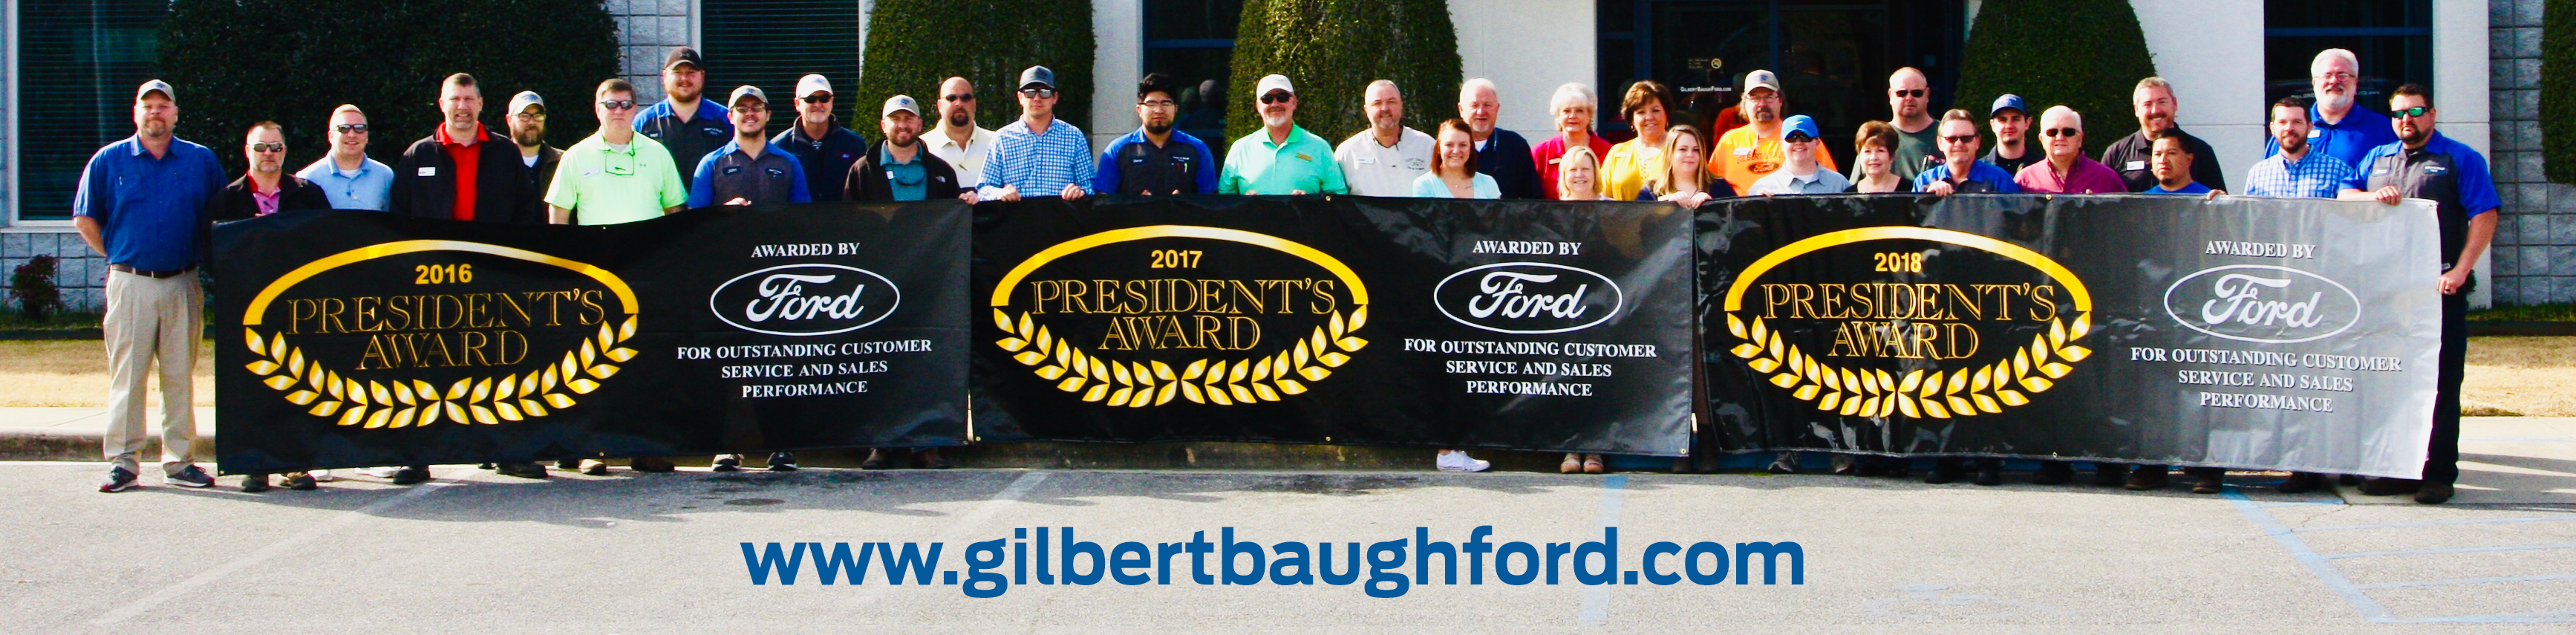 ford-presidents-award-employee-signs